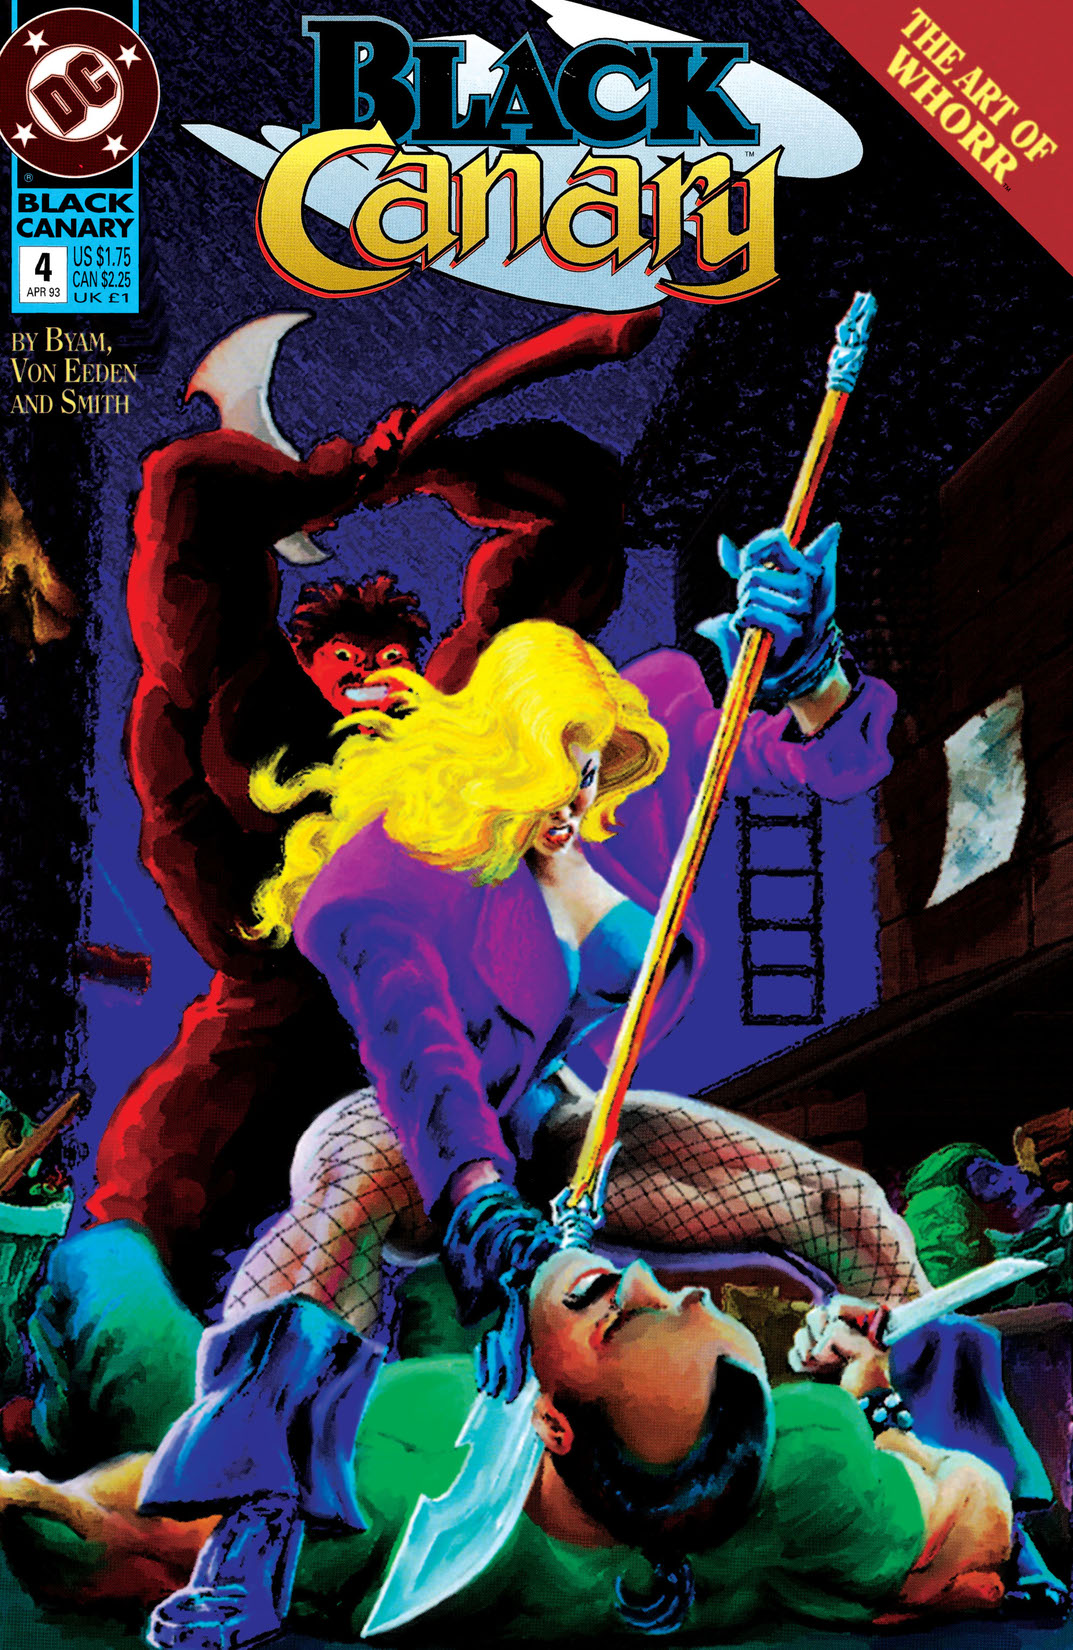 Black Canary (1992-) #4 preview images